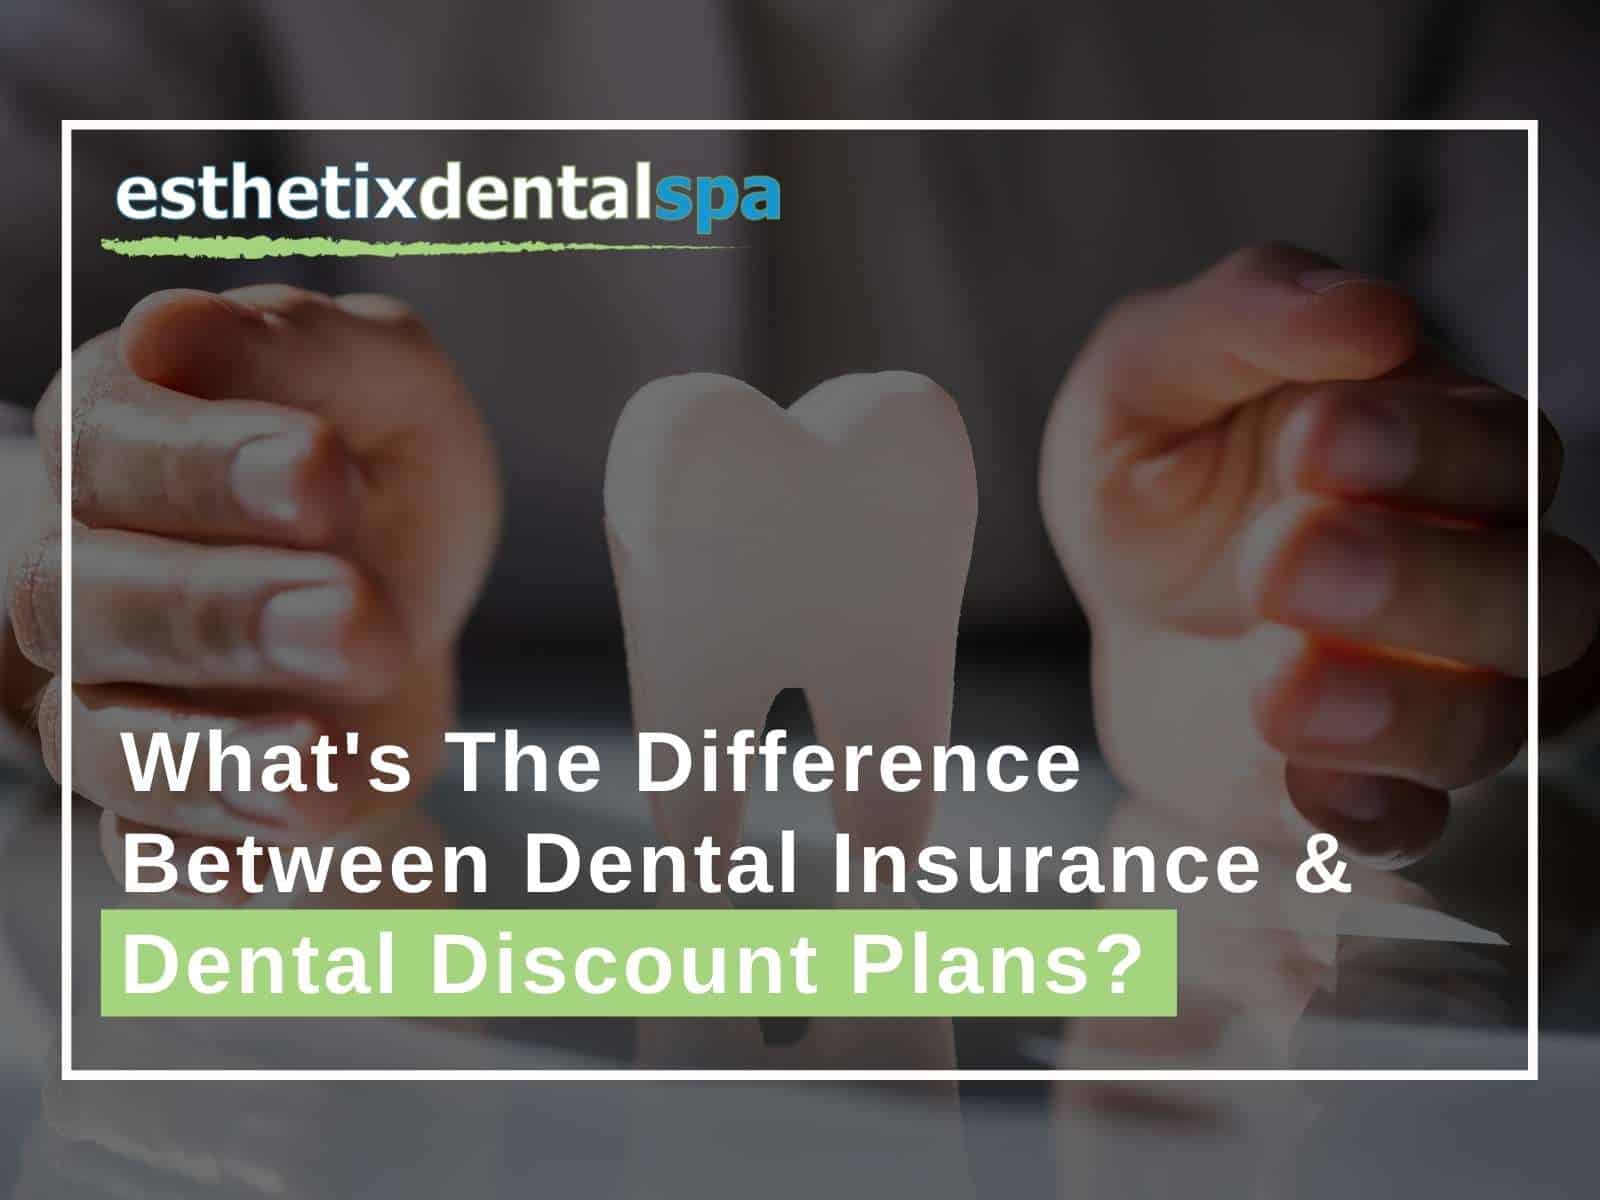 What's The Difference Between Dental Insurance And Dental Discount Plans?